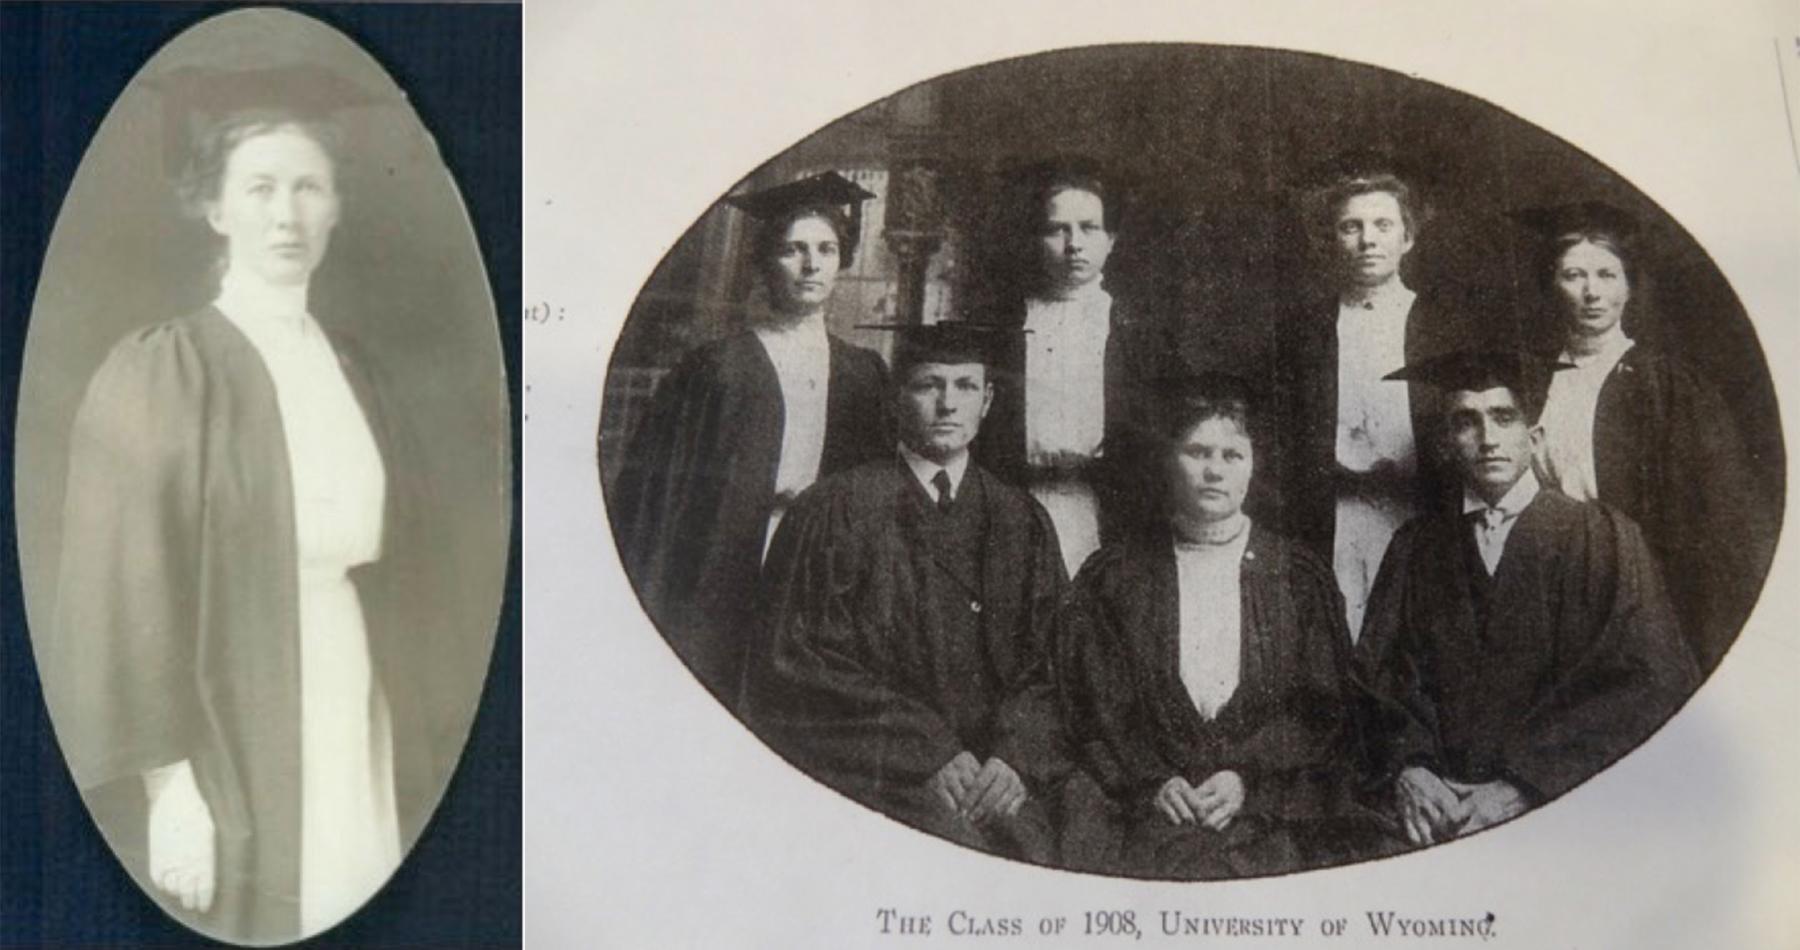 Vie’s graduation portrait, and with her fellow graduates in the in the University of Wyoming class of 1908. Vie is at far right. Garber family photo. 